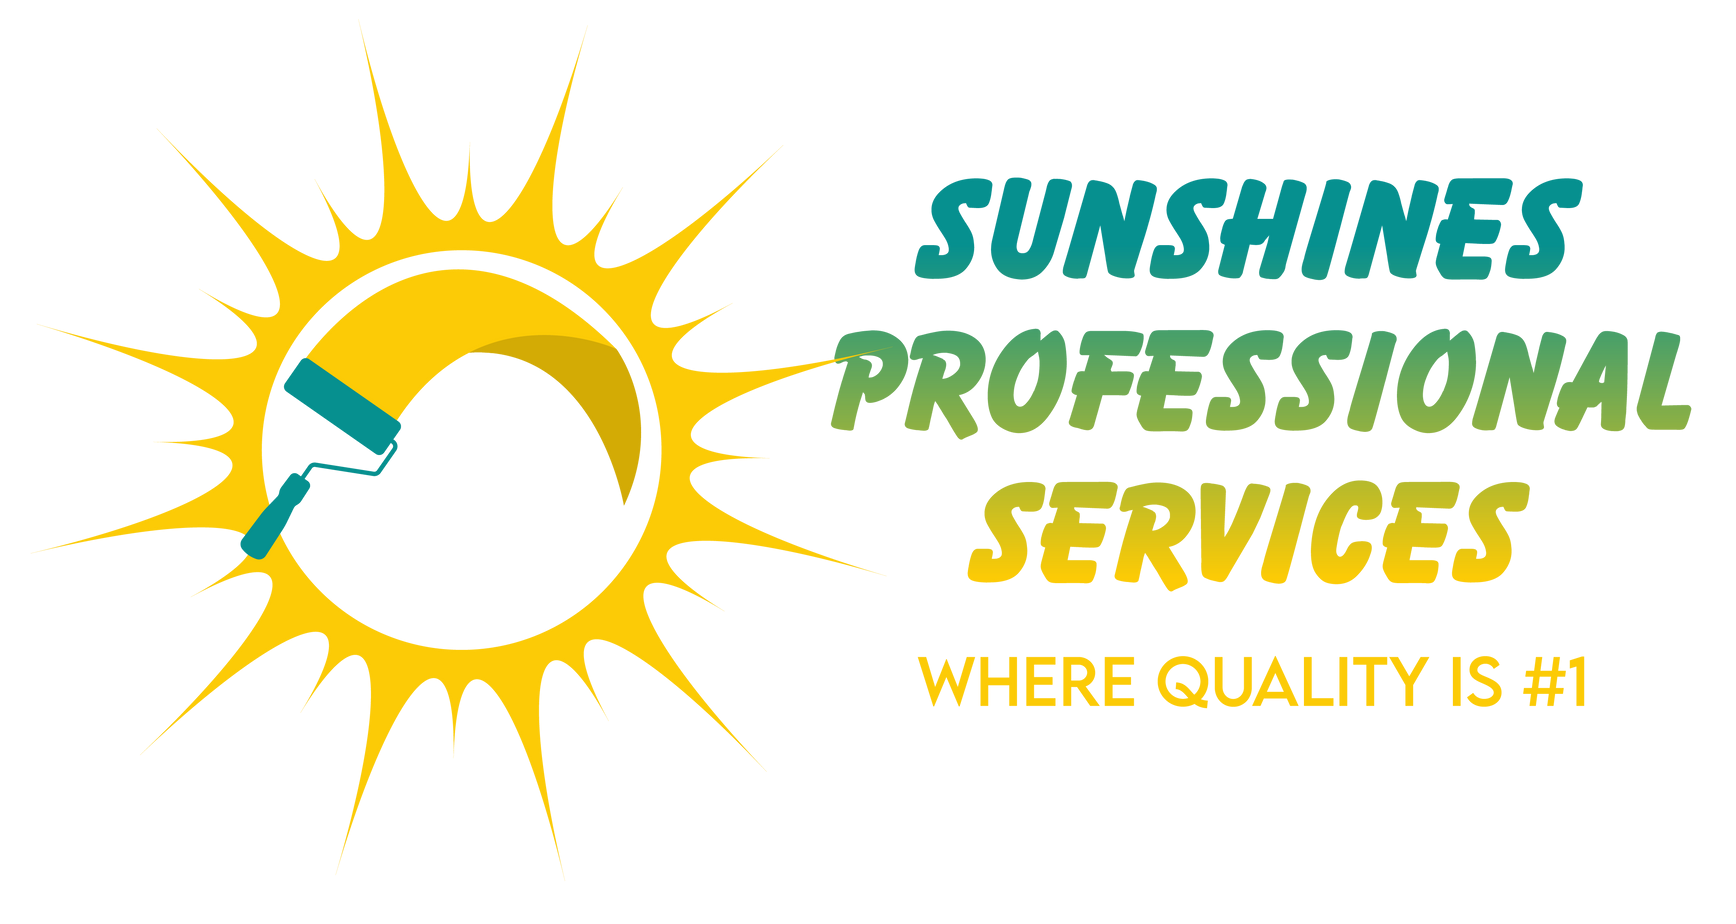 Sunshines Professional Services